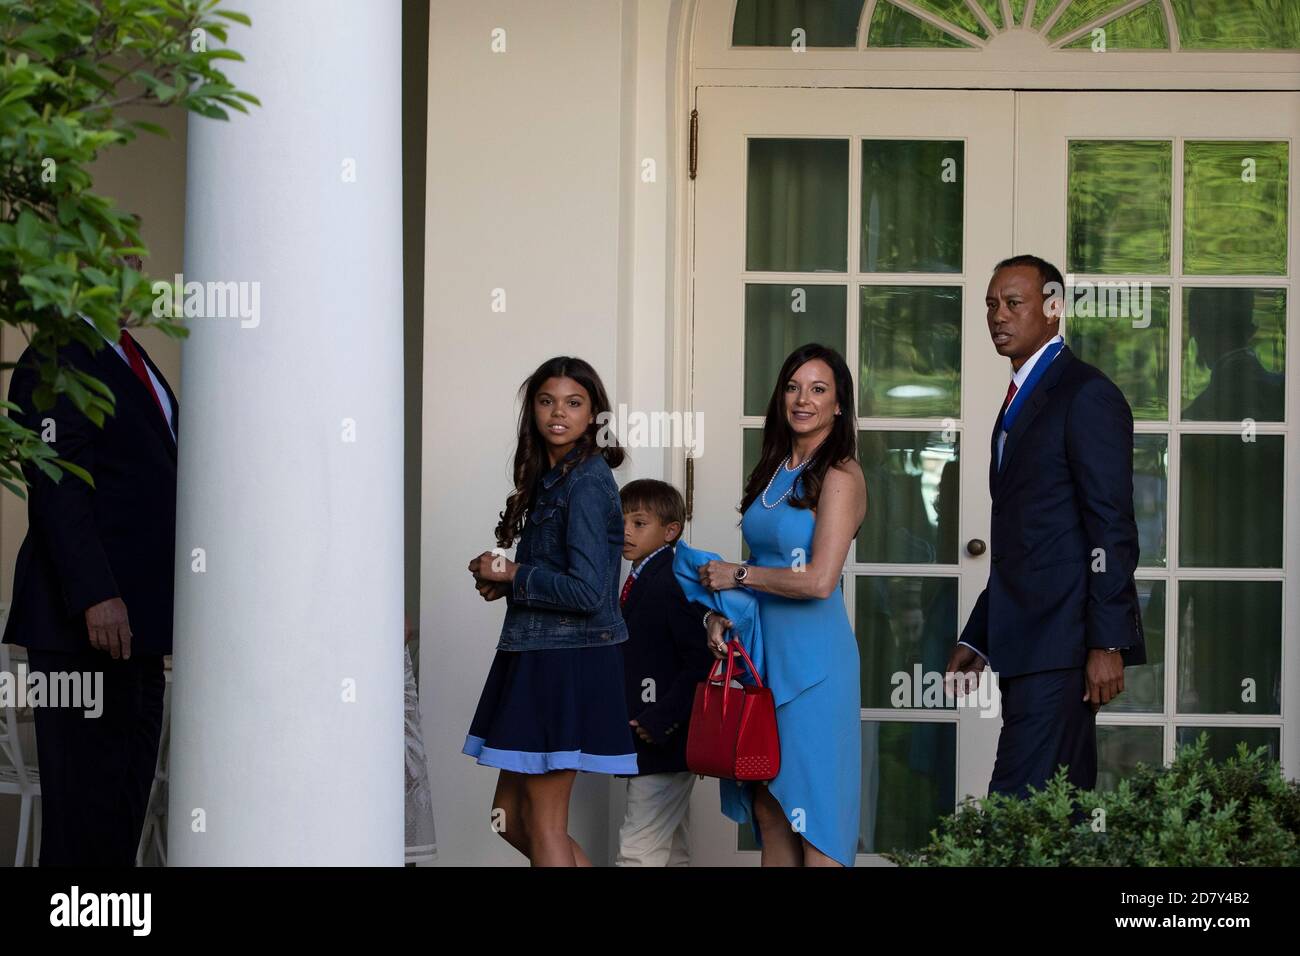 Golfer Tiger Woods accompanied by his children and girlfriend Erica Herman, follow U.S. President Donald Trump into the Oval Office after Trump awarded the Presidential Medal of Freedom to Woods in the Rose Garden of the White House in Washington, D.C. on Monday, May 6, 2019. The Presidential Medal of Freedom is the highest honor a U.S. President can bestow on a civilian. Woods is the fourth golfer to receive the award. Credit: Alex Edelman/The Photo Access Stock Photo